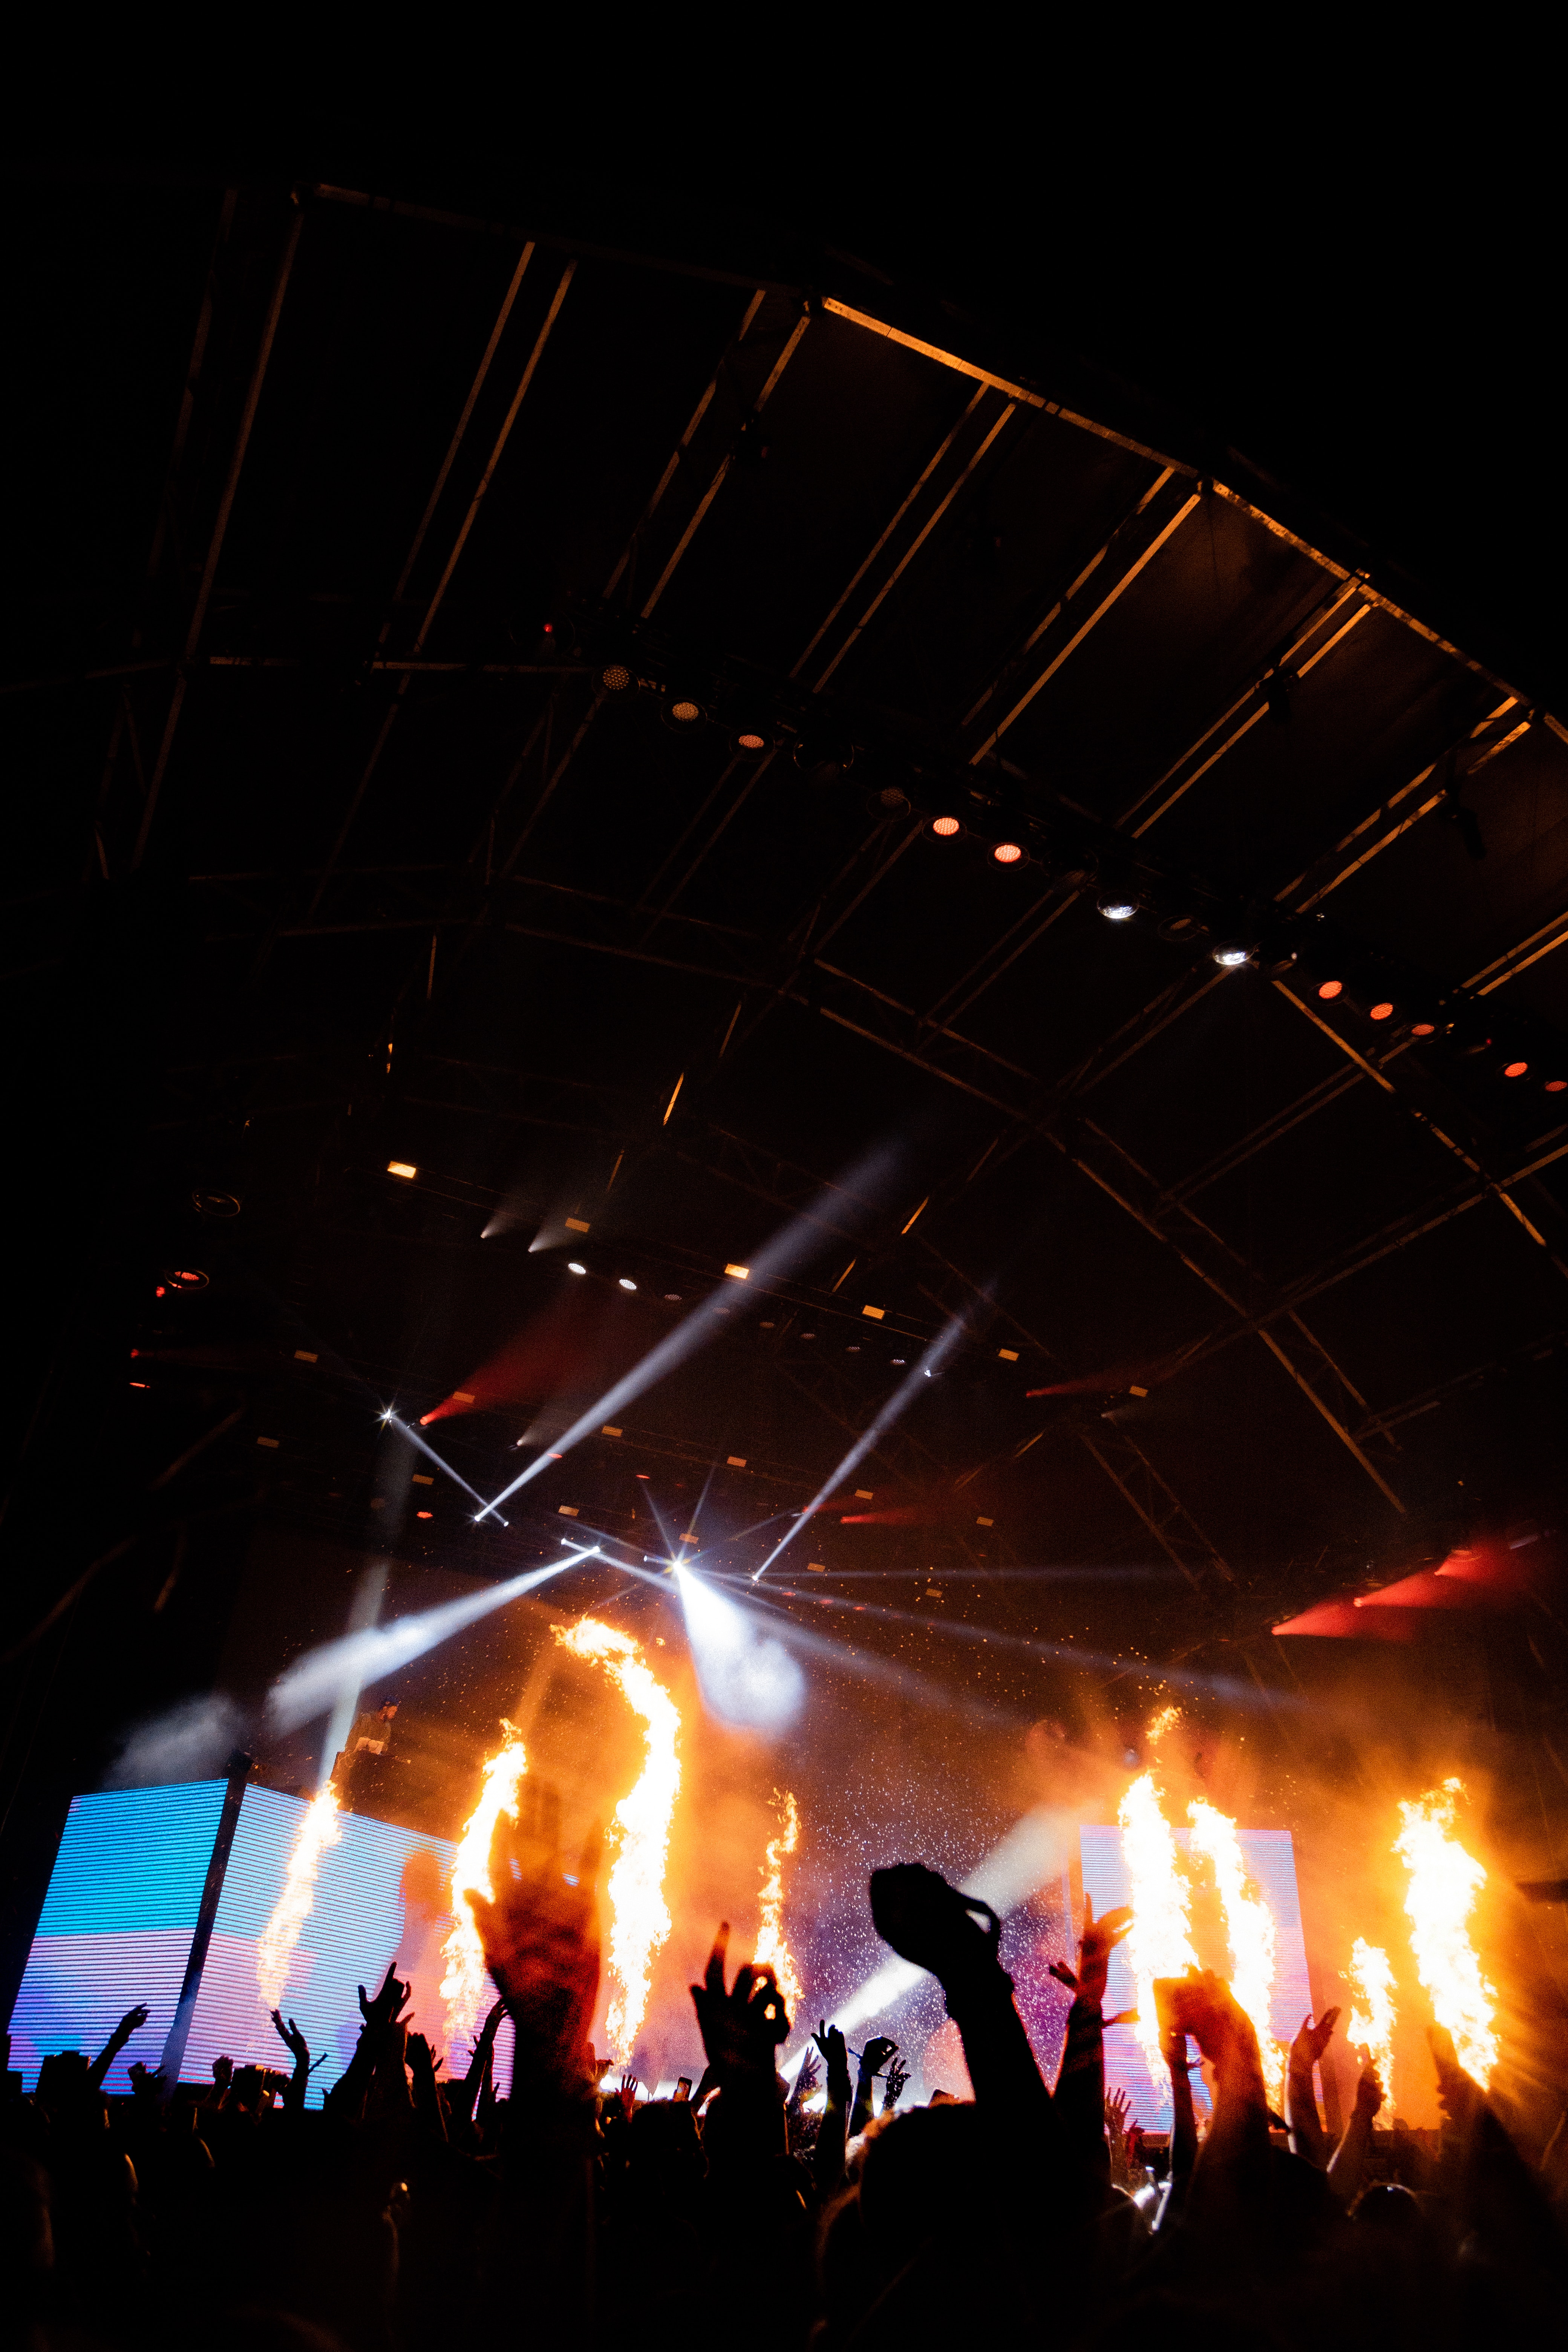 75085 download wallpaper music, fire, dark, concert, scene, floodlights, spotlights screensavers and pictures for free